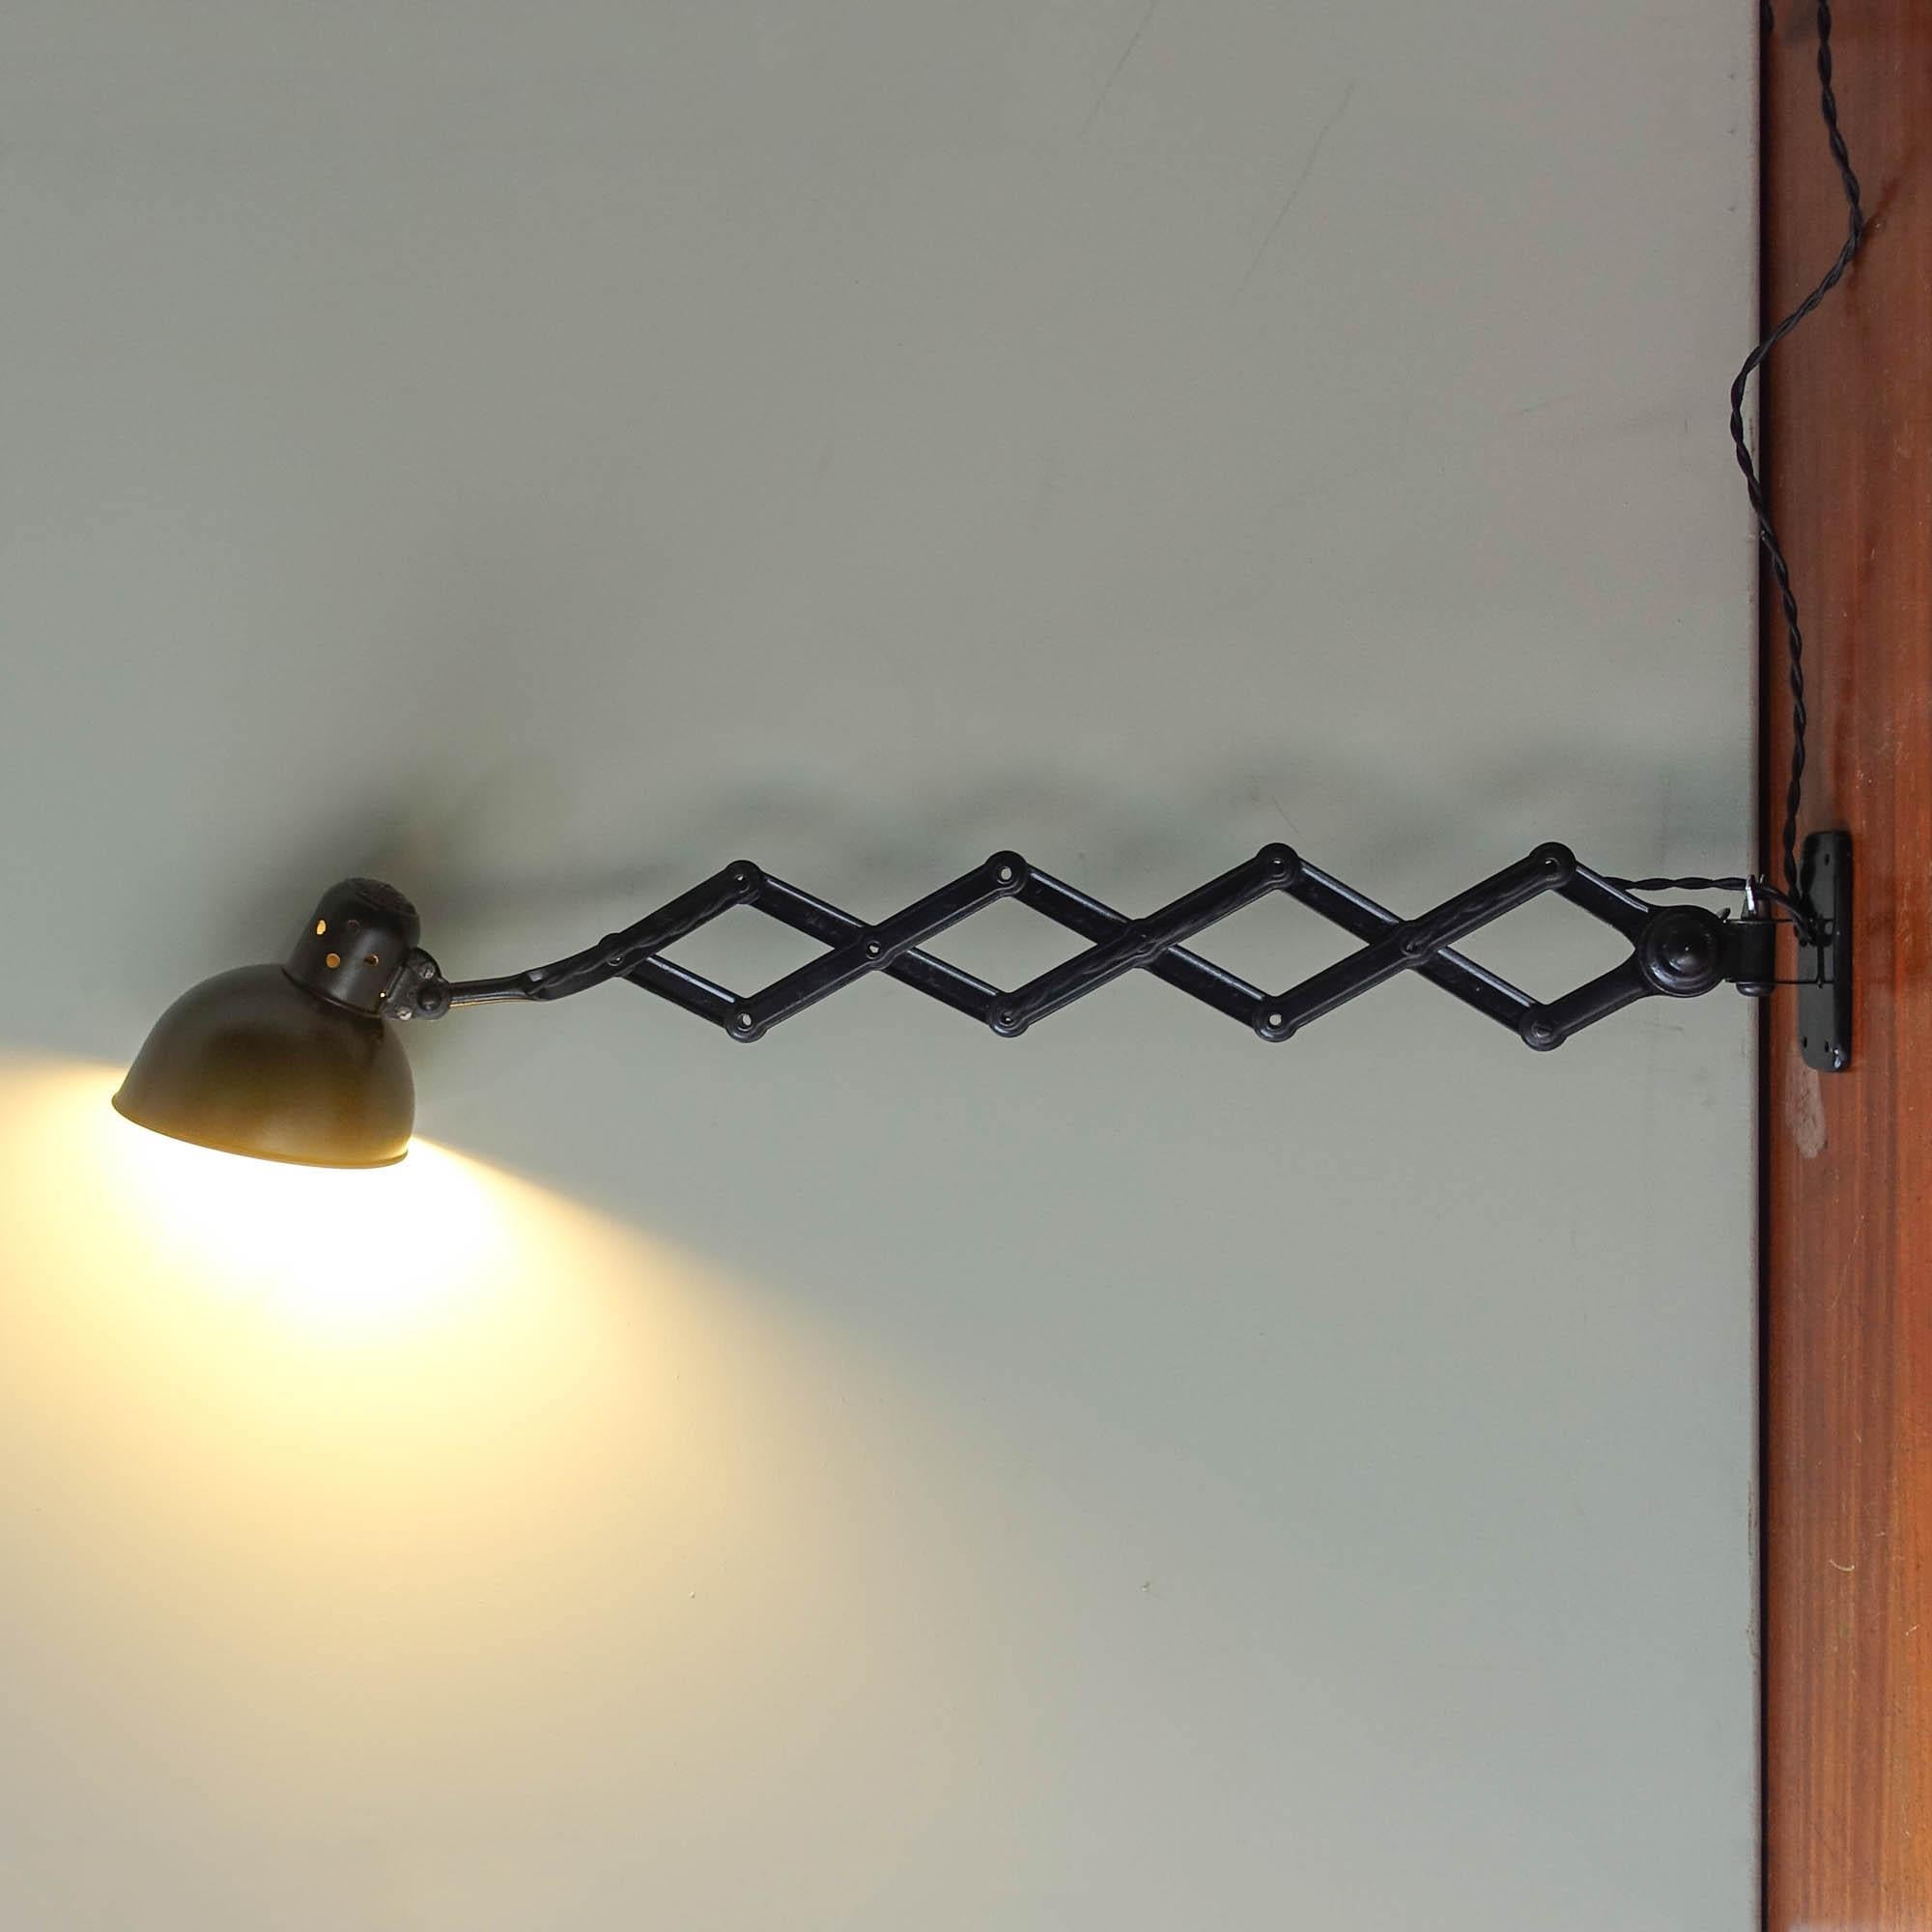 This 6718 model scissor arm wall lamp was designed in the 1930's by Christian Dell, and manufactured by Kaiser Idell. It features an adjustable black lacquered metal shade, with an adjustable scissor arm, that extends up to 90 cm long. Very